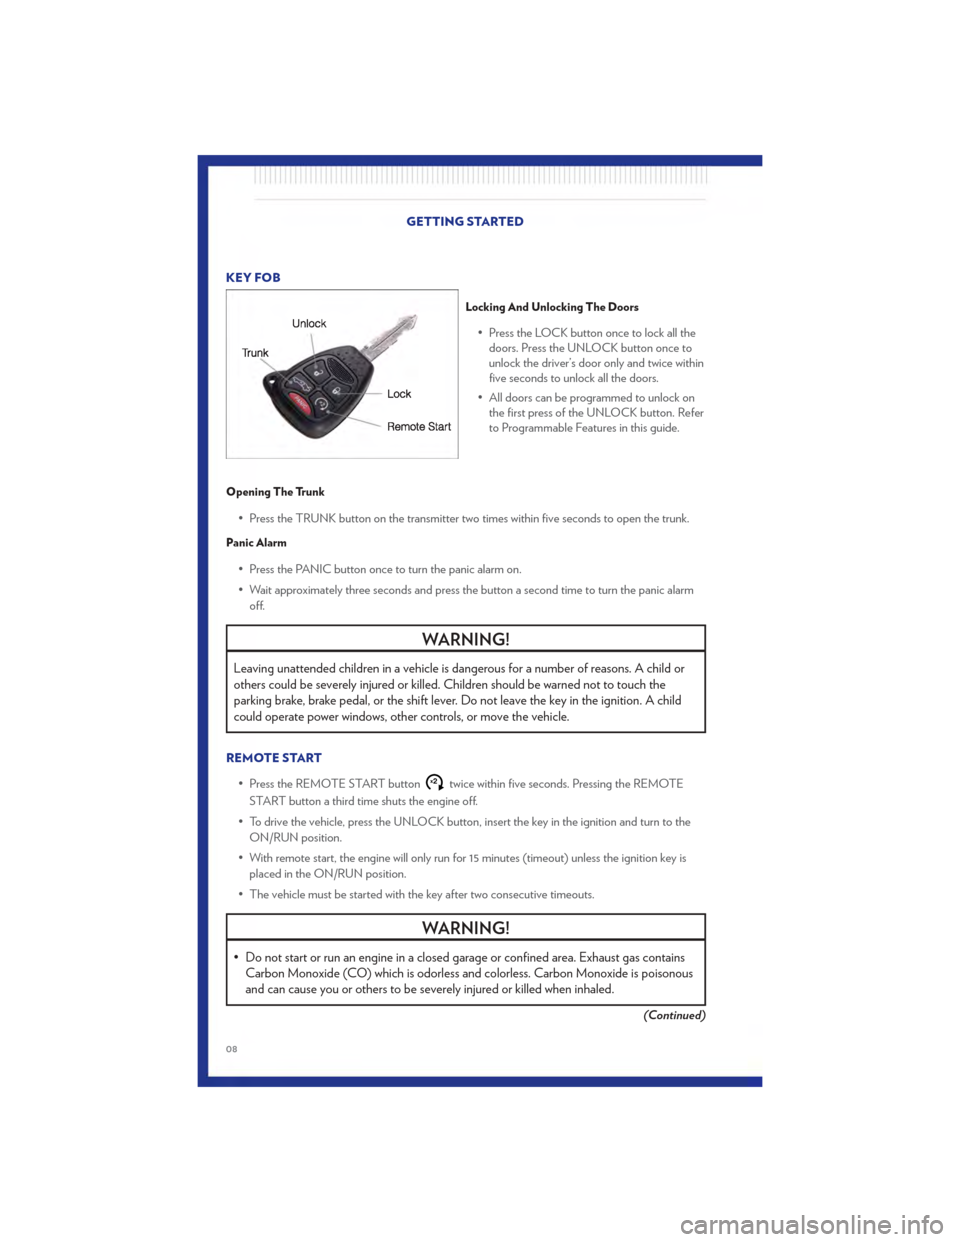 CHRYSLER 200 2011 1.G User Guide KEY FOB
Locking And Unlocking The Doors
• Press the LOCK button once to lock all thedoors. Press the UNLOCK button once to
unlock the driver’s door only and twice within
five seconds to unlock all